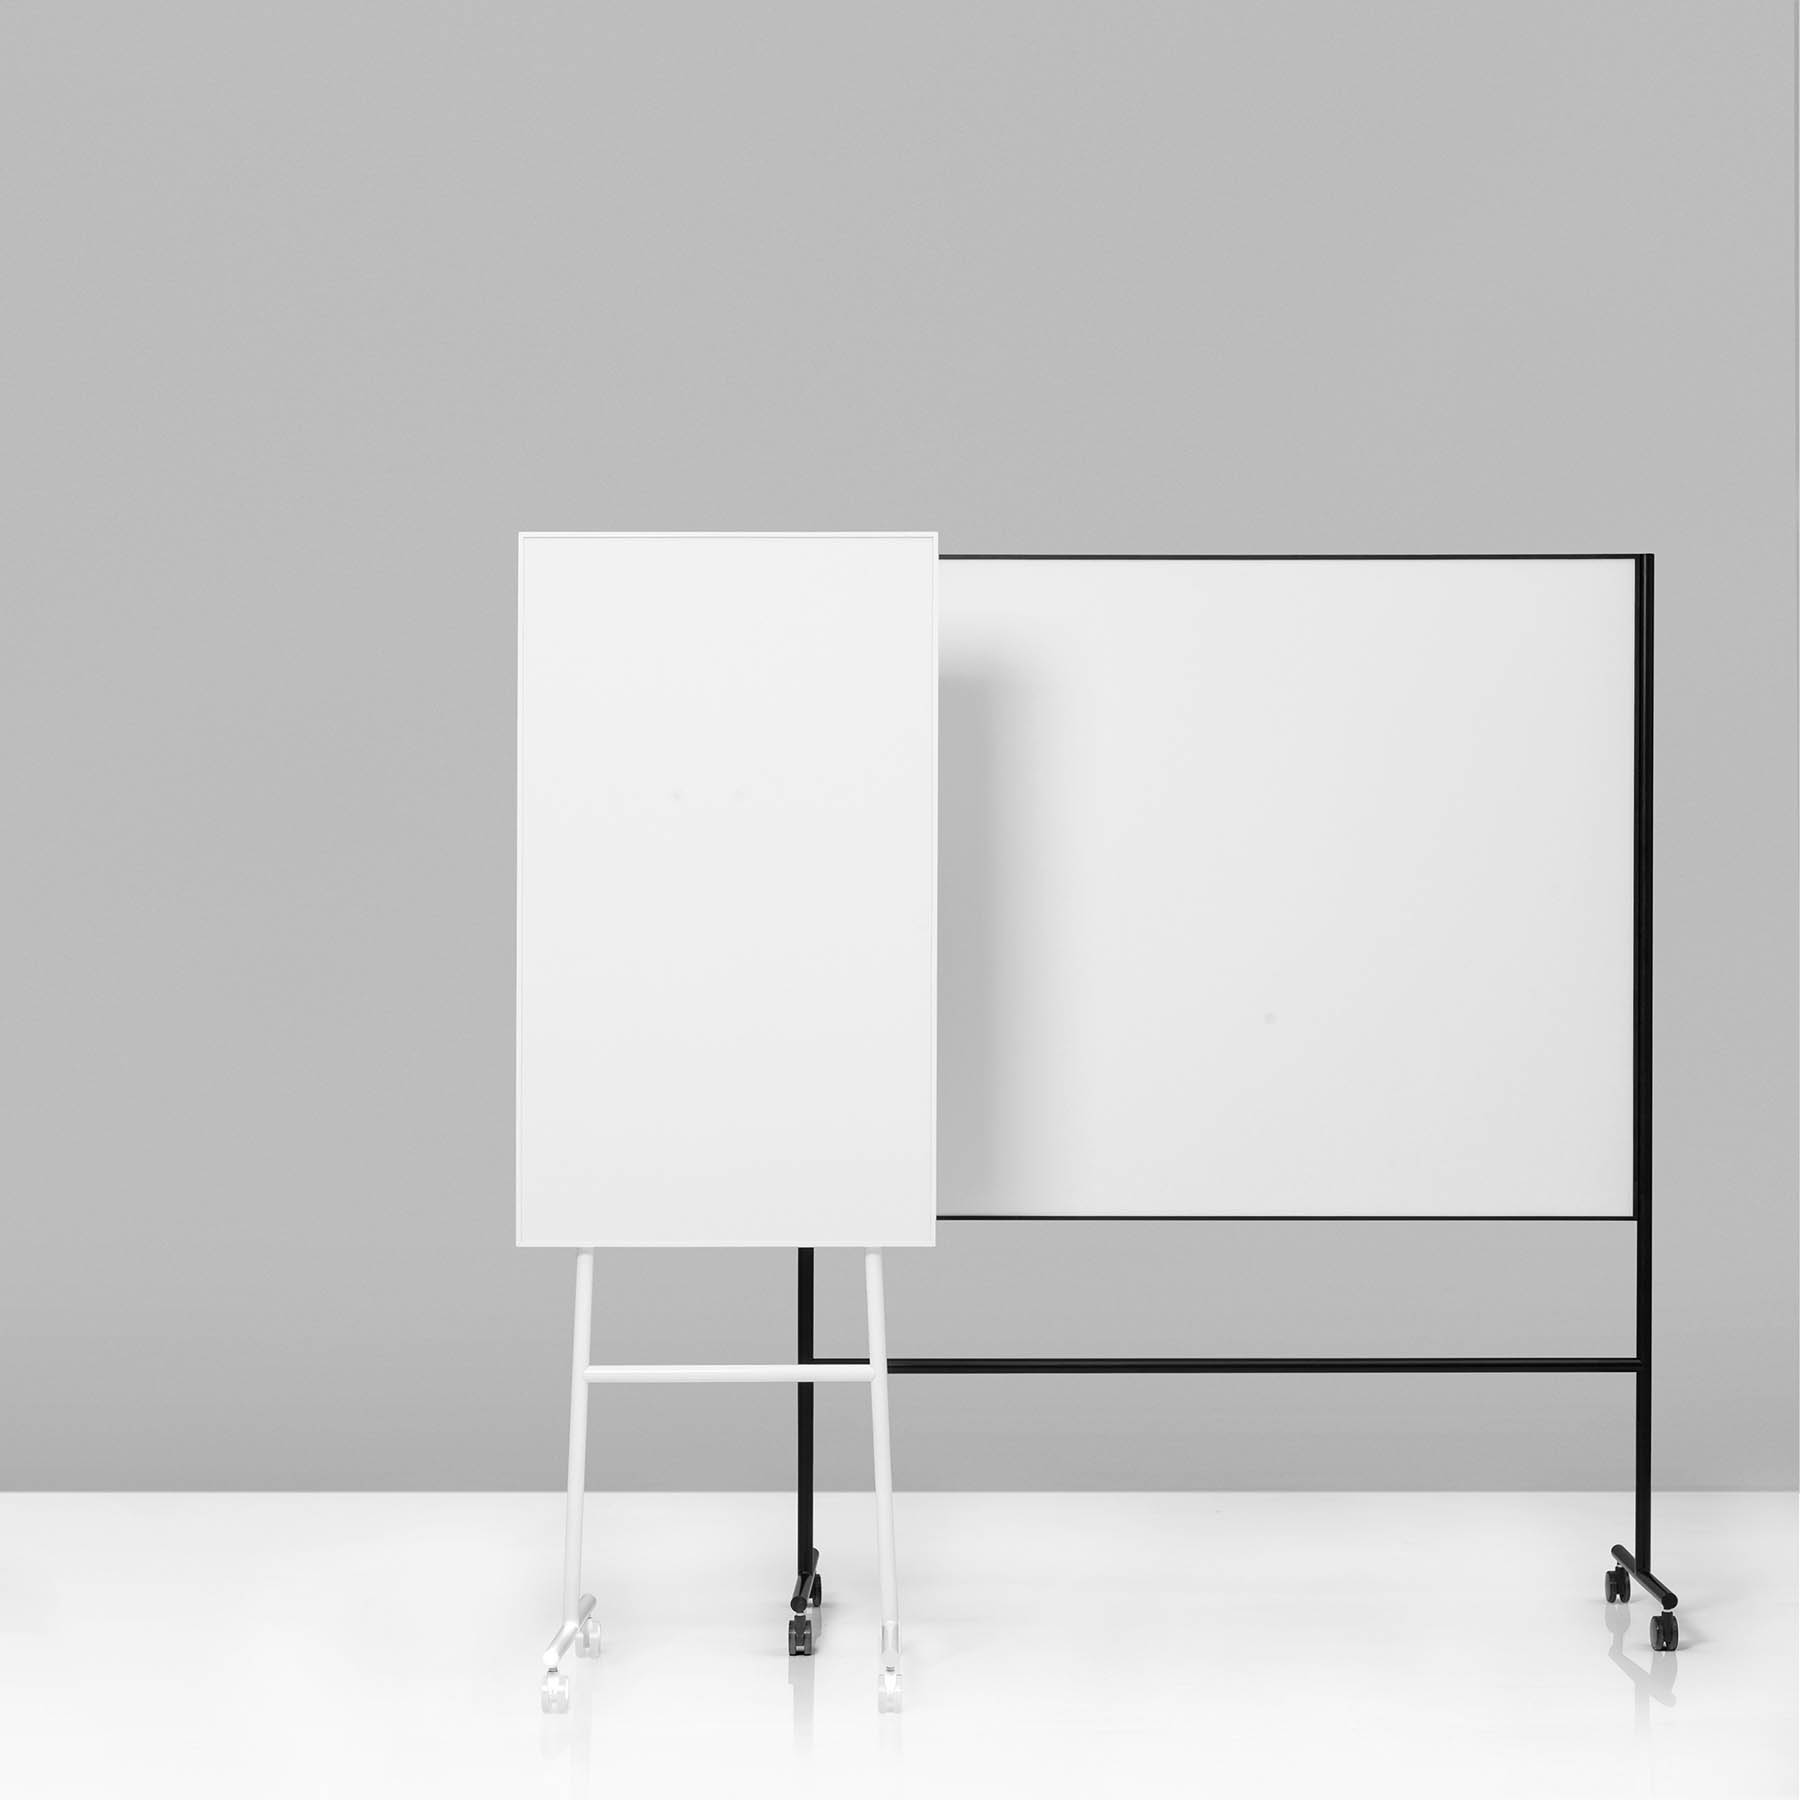 Lintex ONE flip chart easel, In black or white, Shop now!